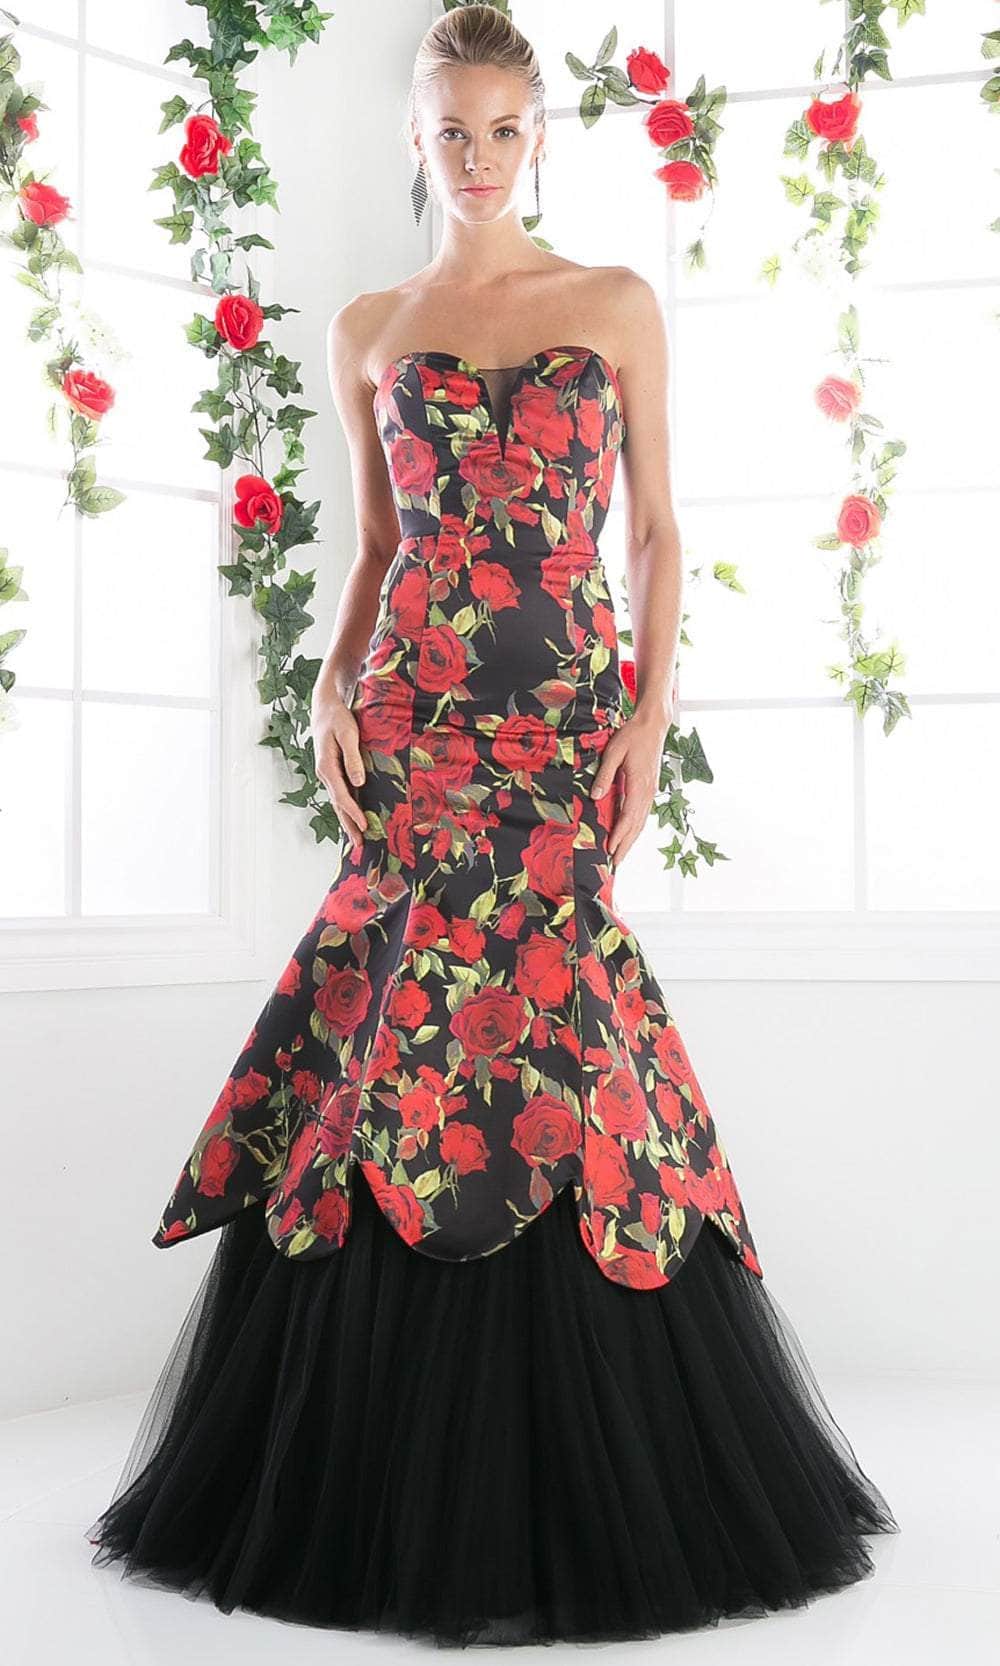 Image of Ladivine CR760 - Floral Printed Strapless Gown